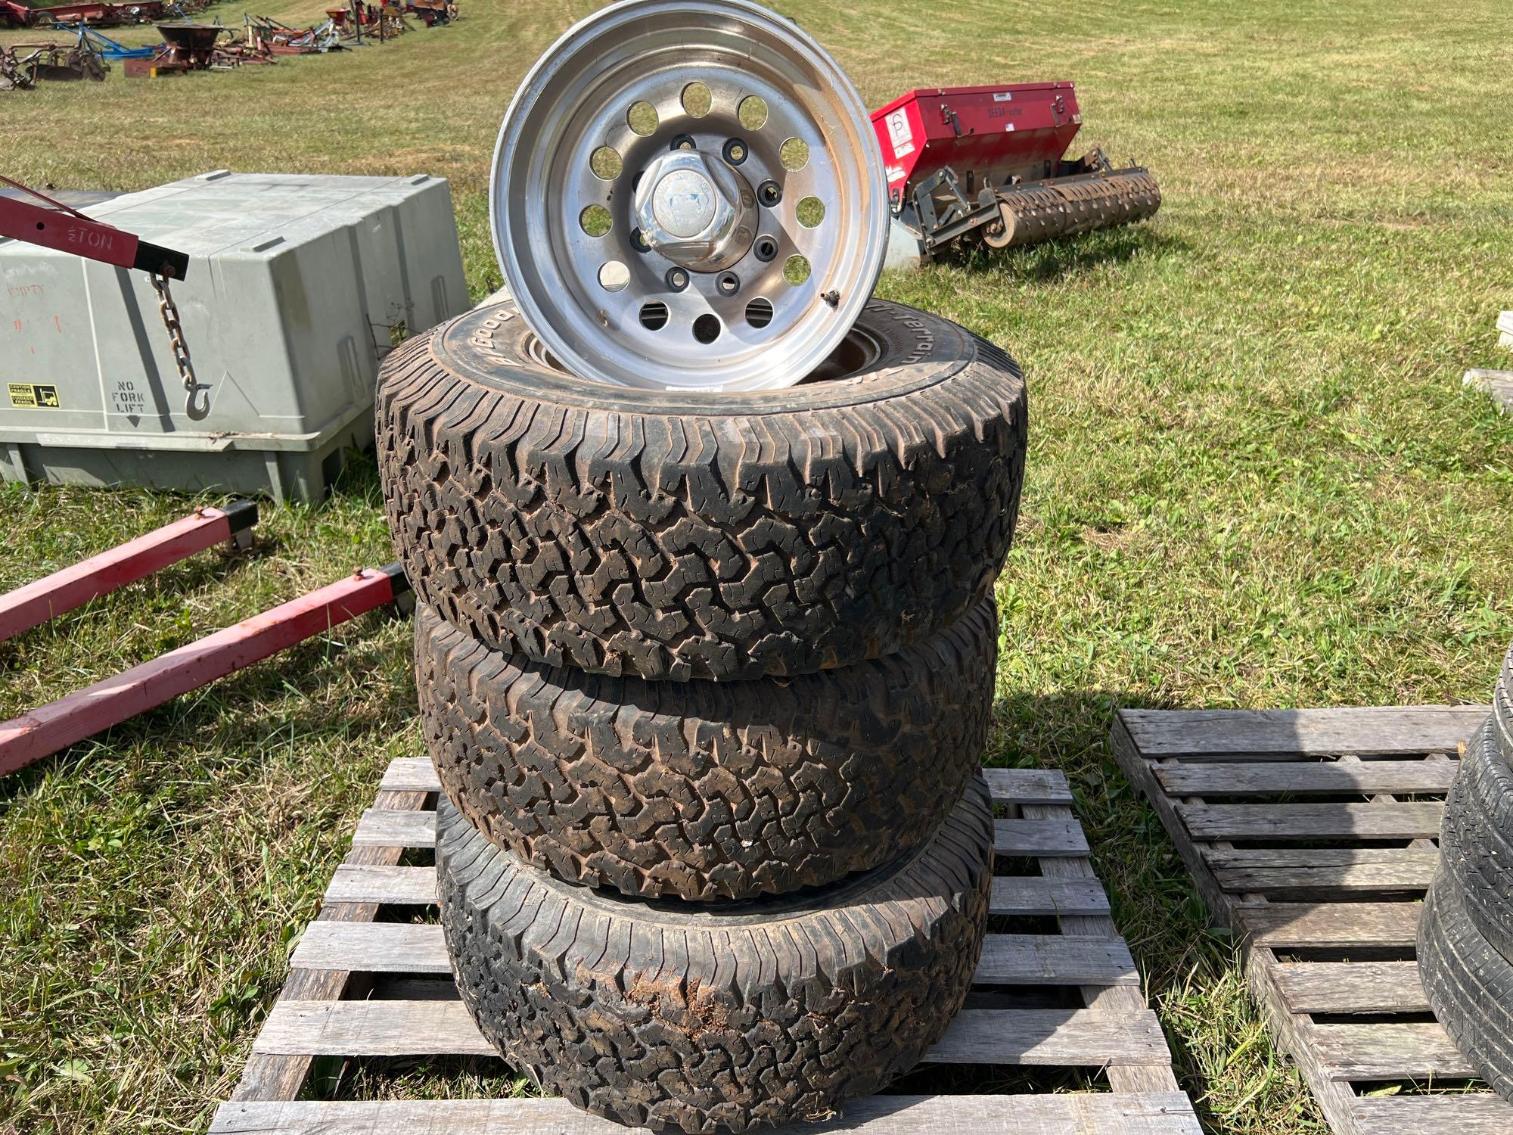 Image for Set of 4 American 16.5x10 Wheels with 3 mounted All Terrain tires BFG 33x12.5R16.5